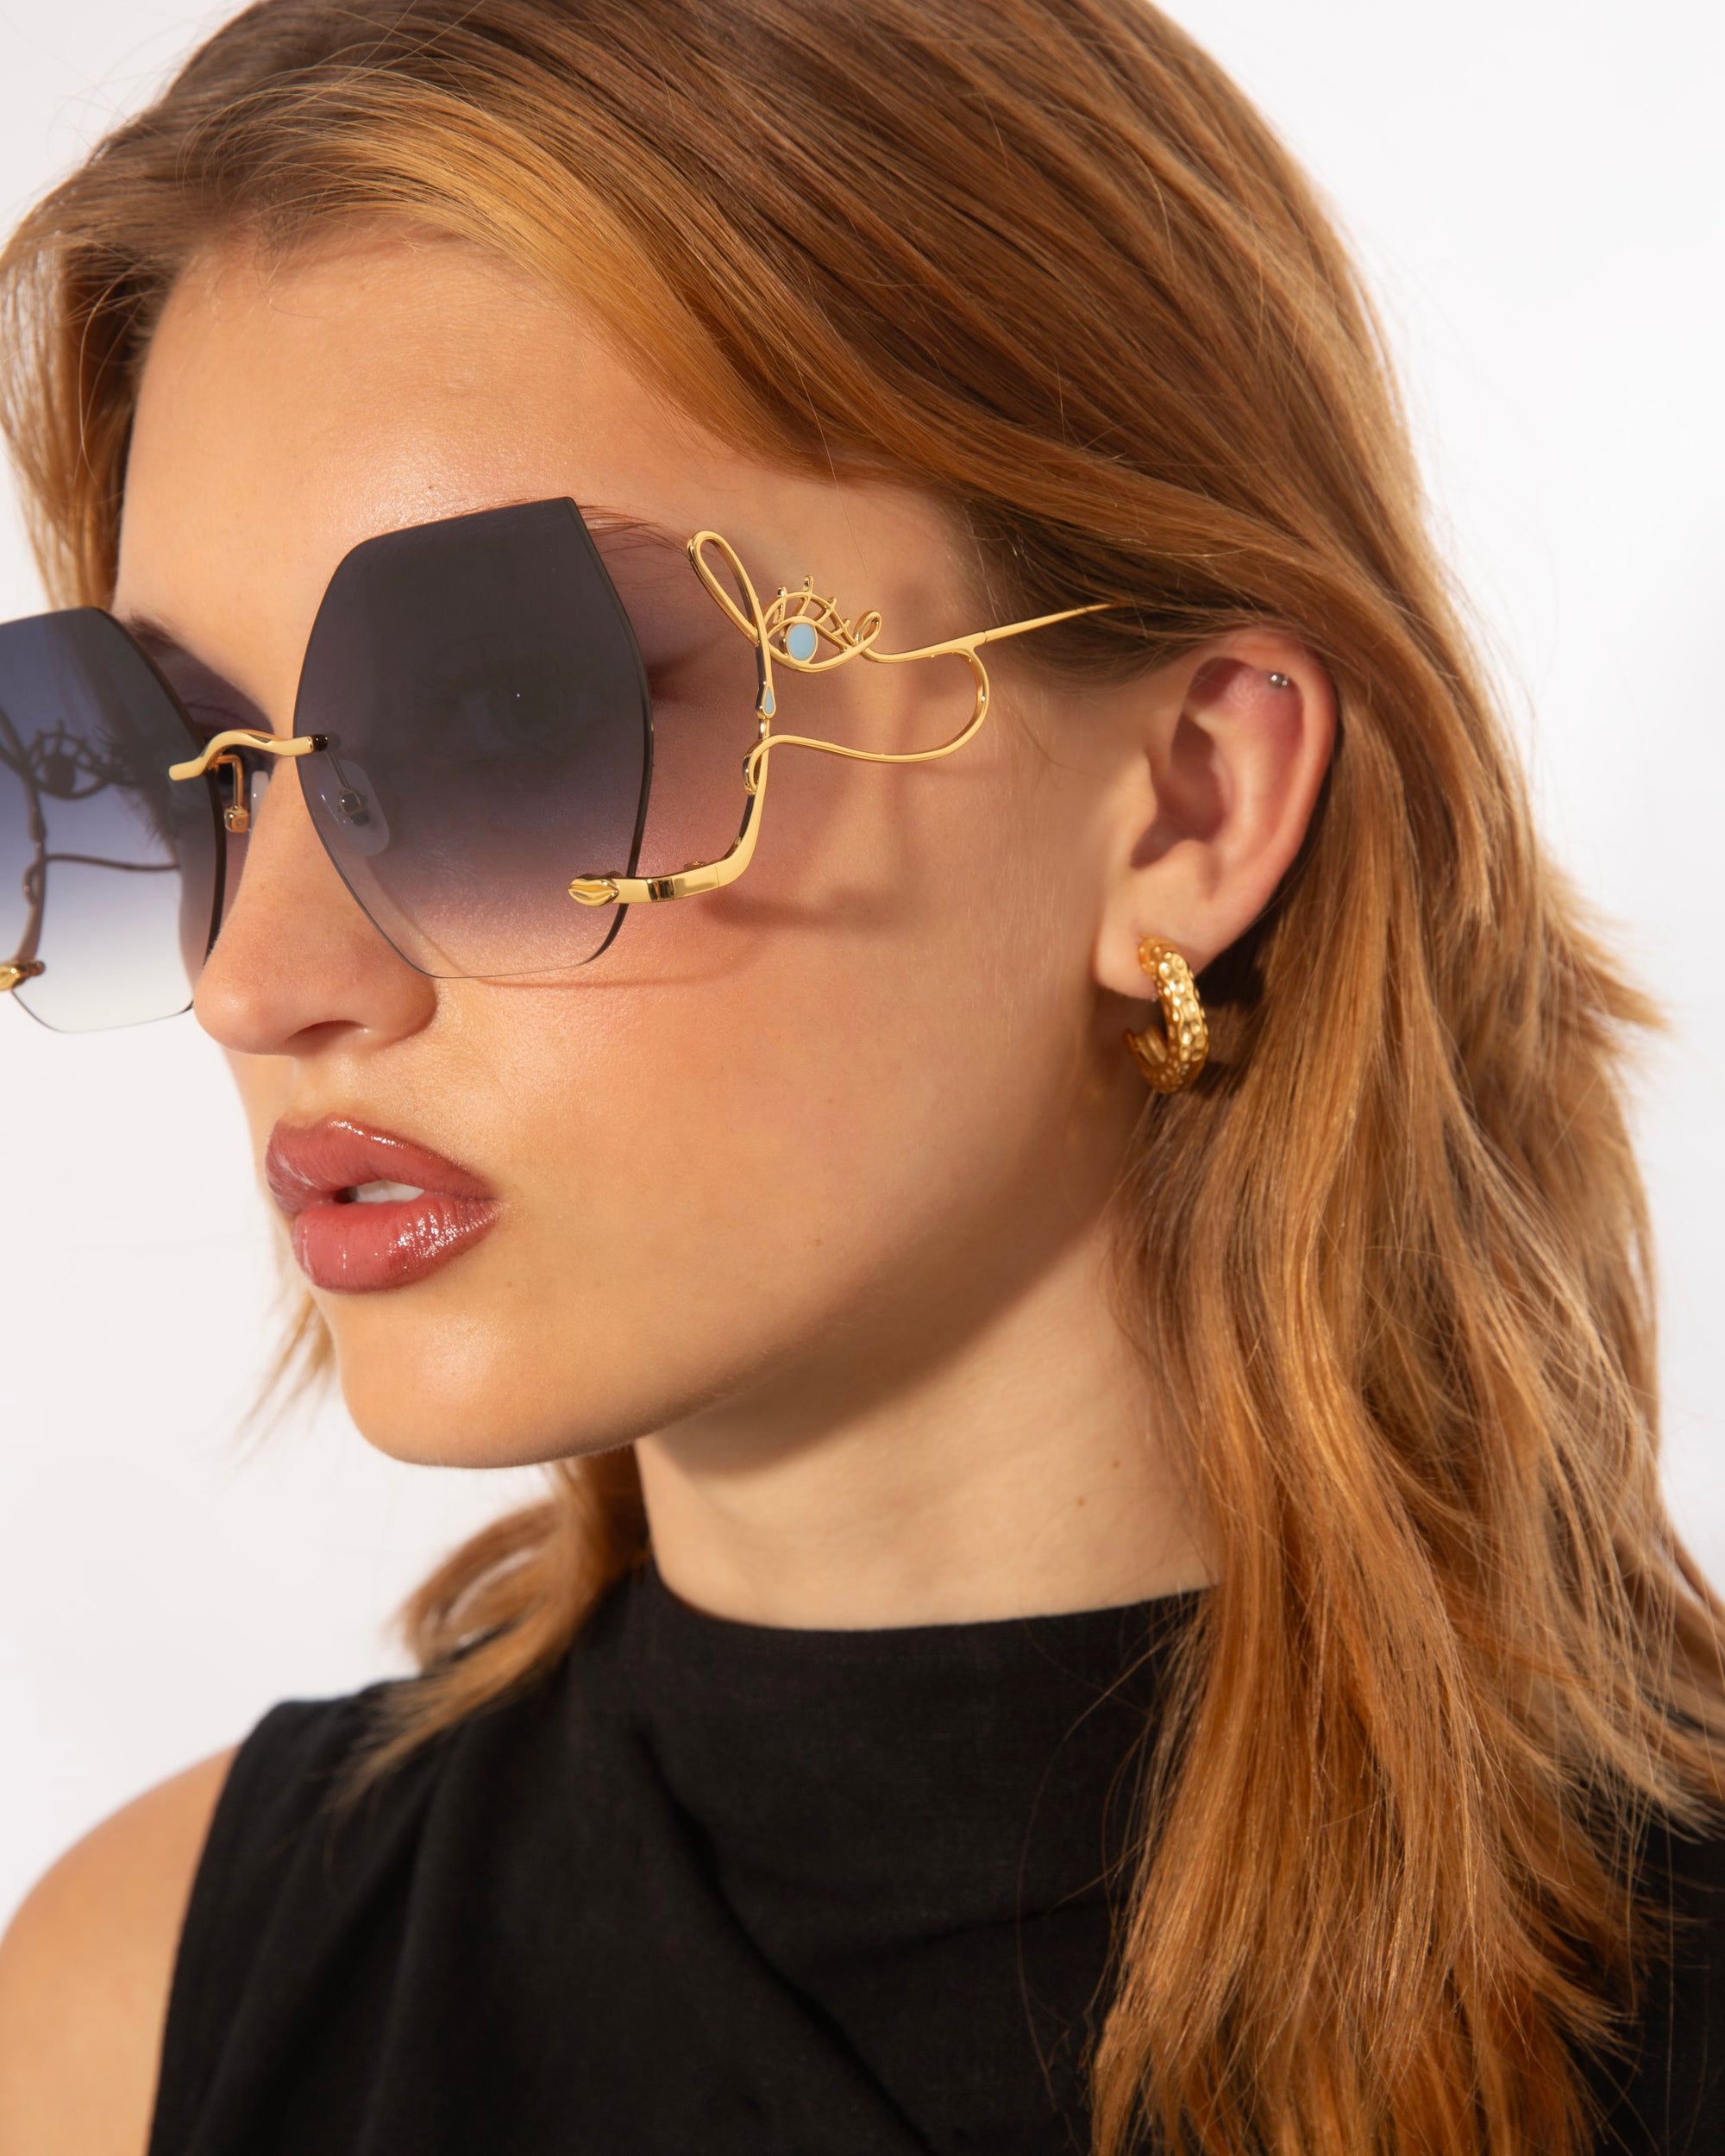 A woman with light brown hair wears large, hexagonal Cry Me a River sunglasses from For Art's Sake® with gradient lenses and gold wireframes. She has a small hoop earring and is dressed in a sleeveless black top, looking to the left against a plain white background. This limited edition accessory exudes timeless elegance.